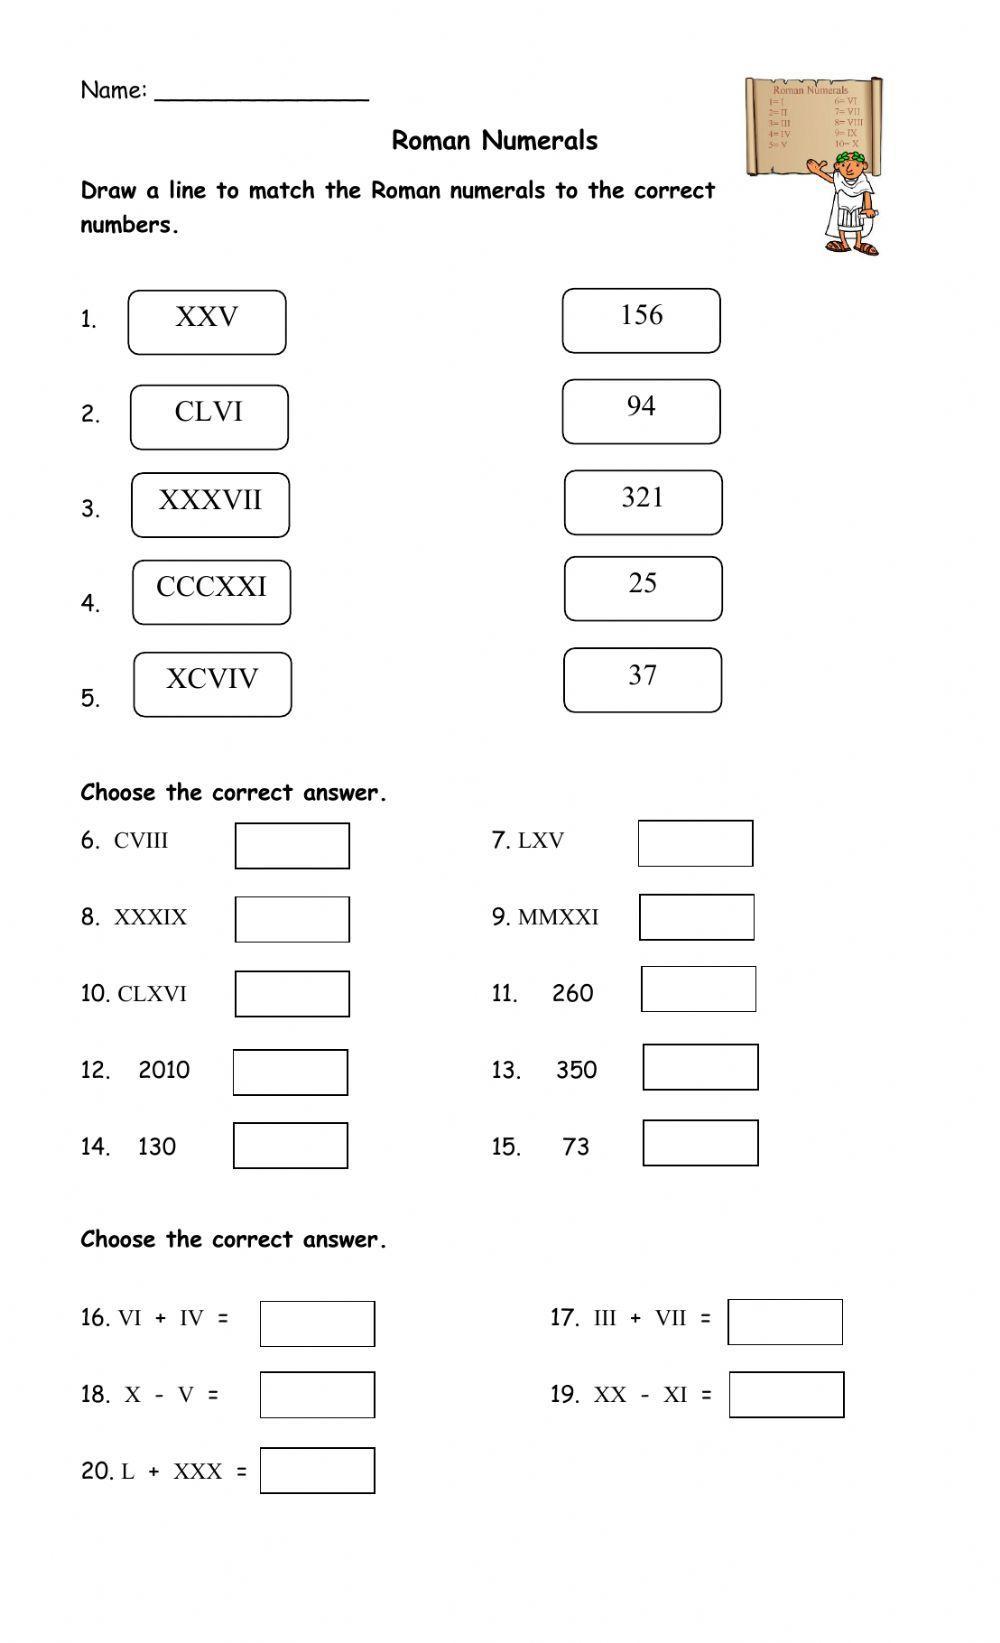 roman-numerals-online-exercise-live-worksheets